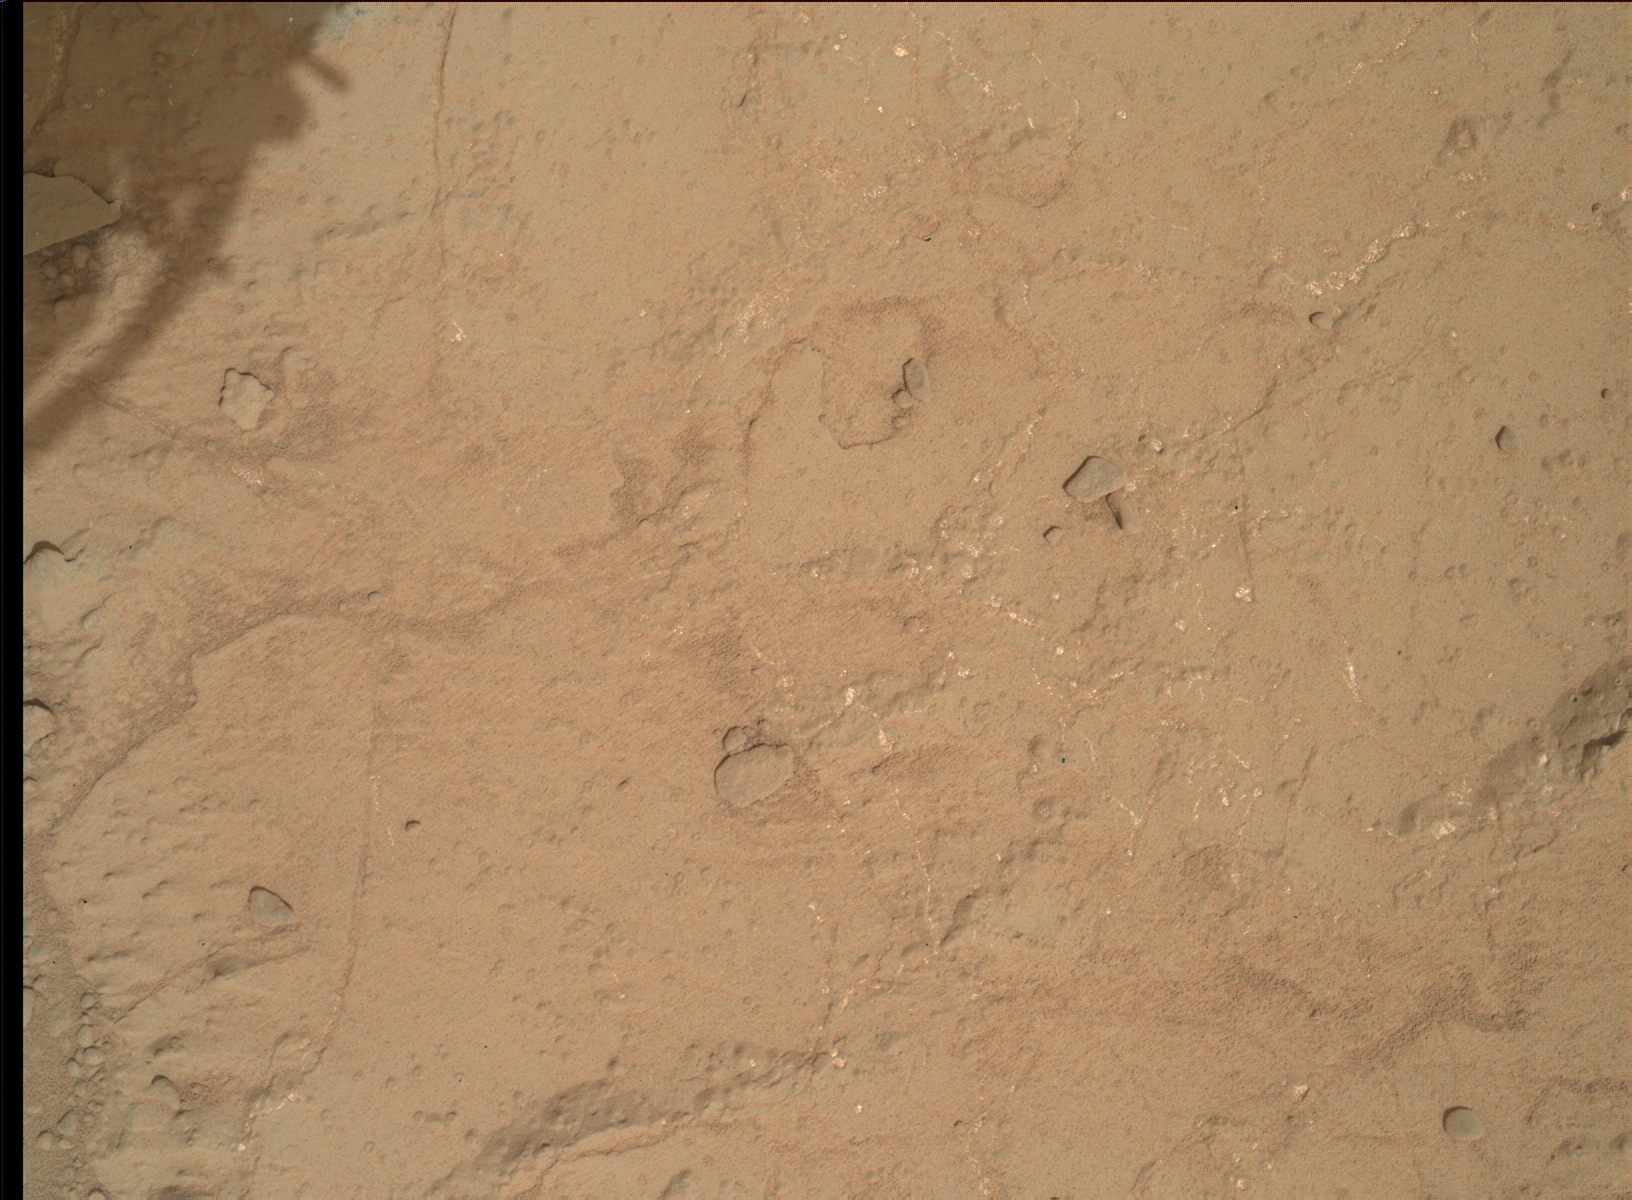 Nasa's Mars rover Curiosity acquired this image using its Mars Hand Lens Imager (MAHLI) on Sol 170